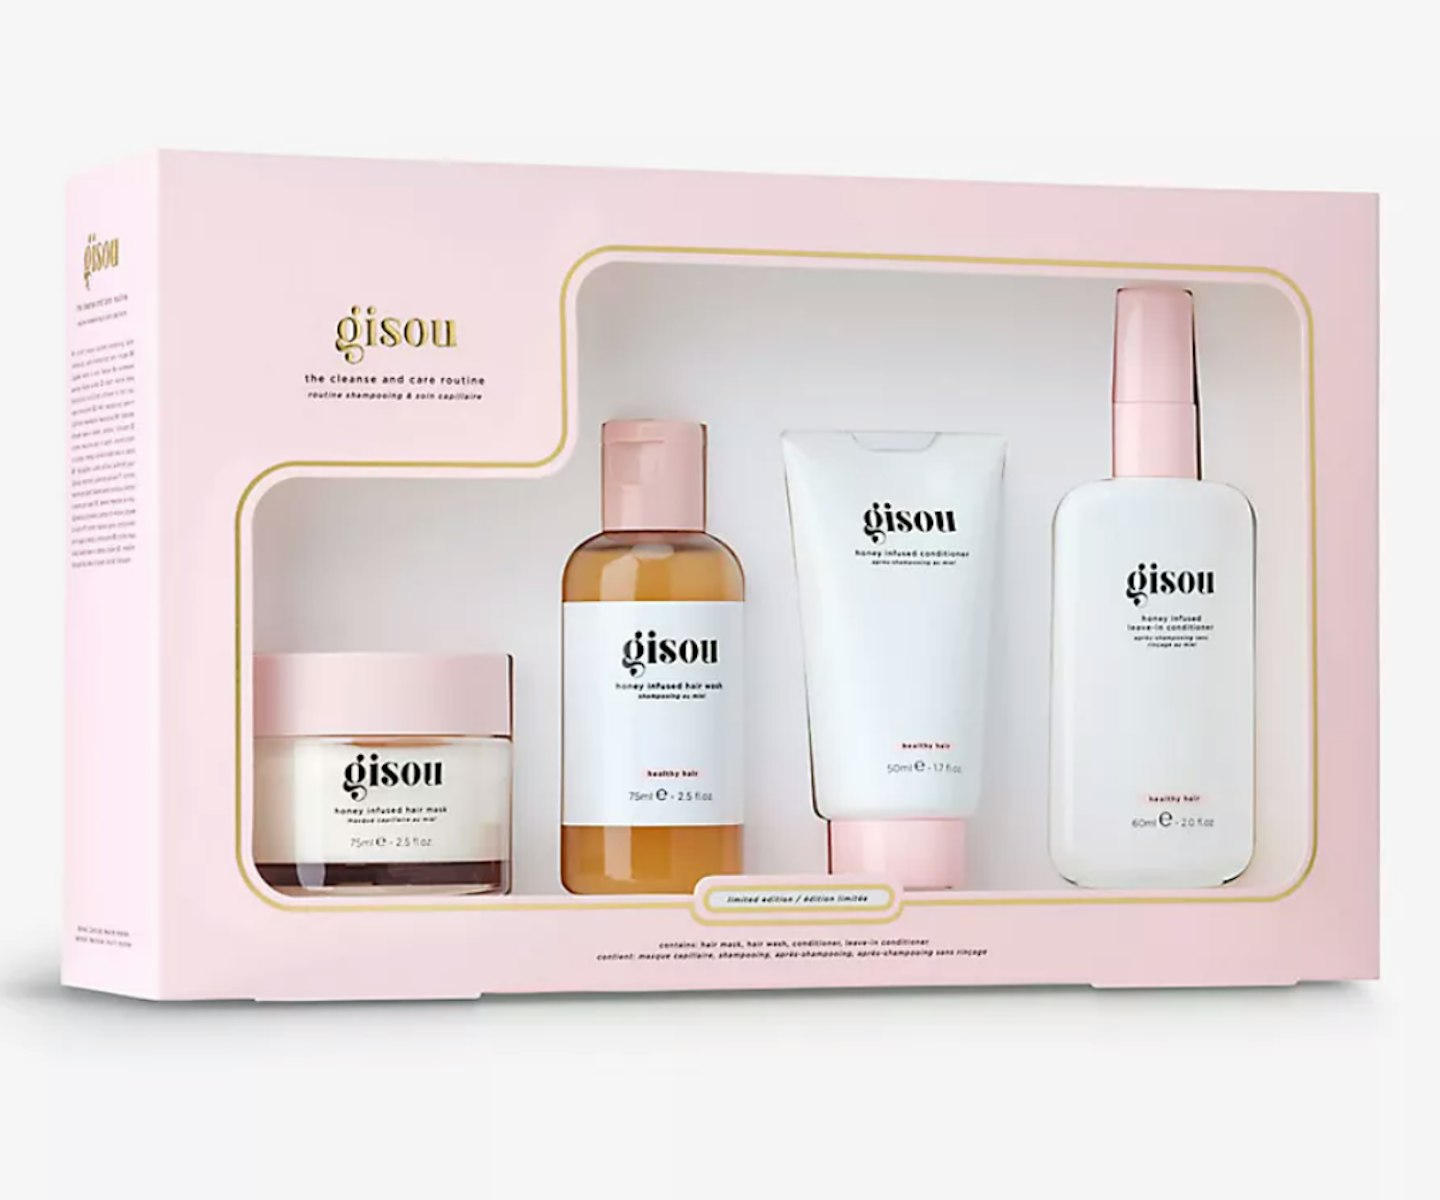 The Cleanse And Care Routine Honey-infused Set